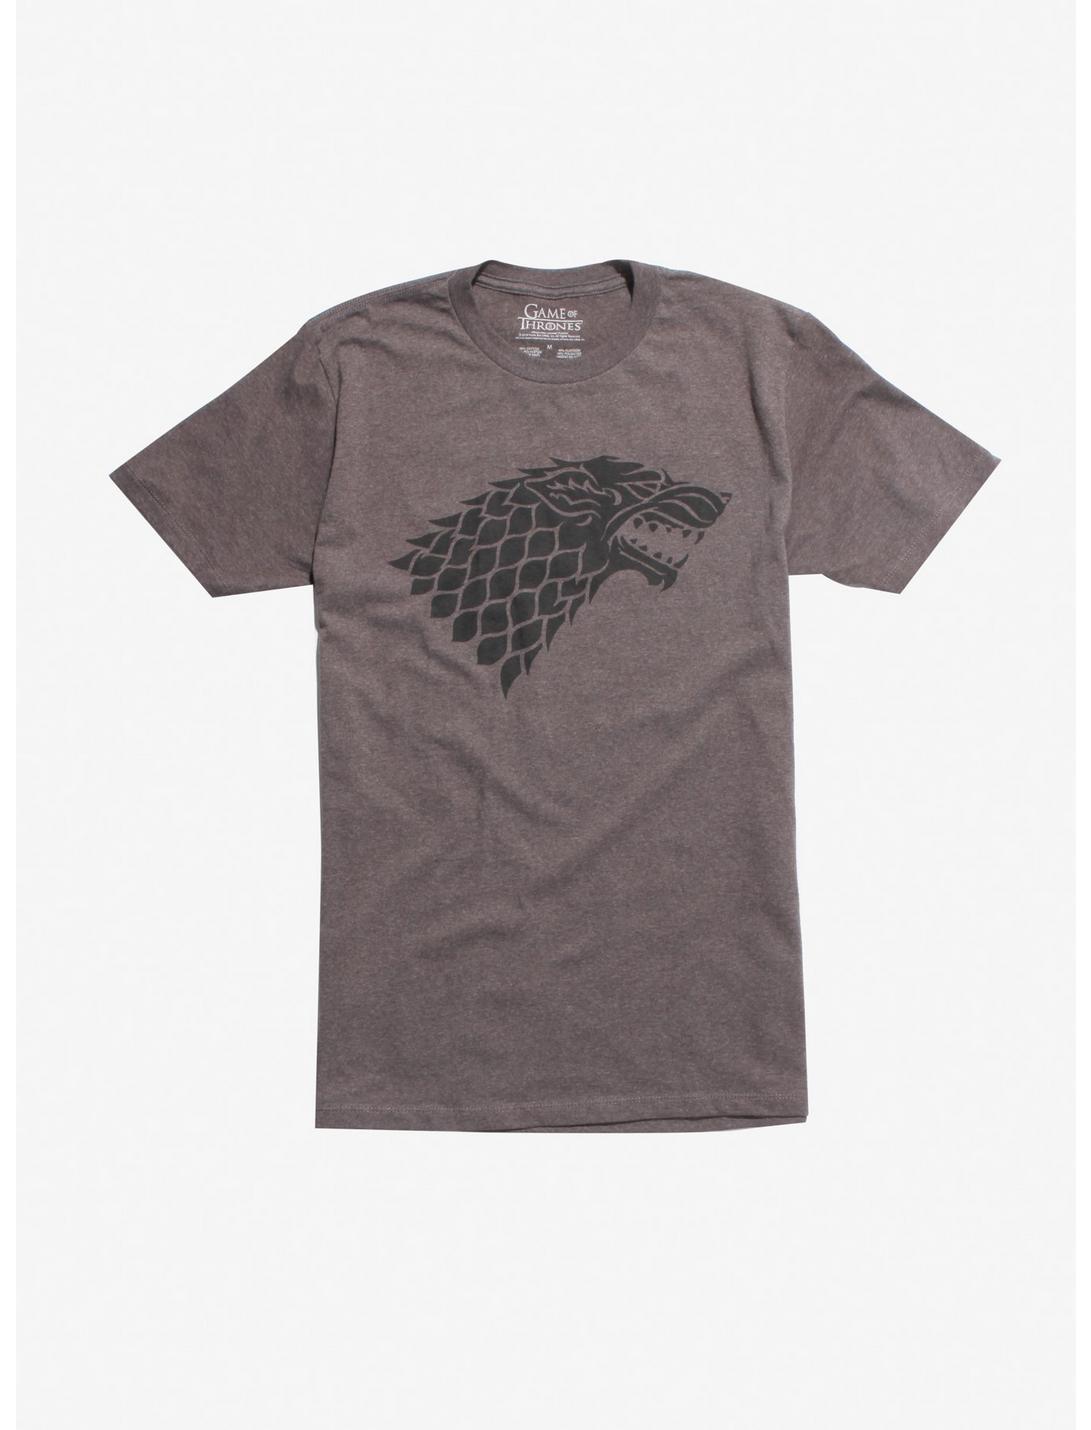 Game Of Thrones Stark Sigil T-shirt, CHARCOAL HEATHER, hi-res